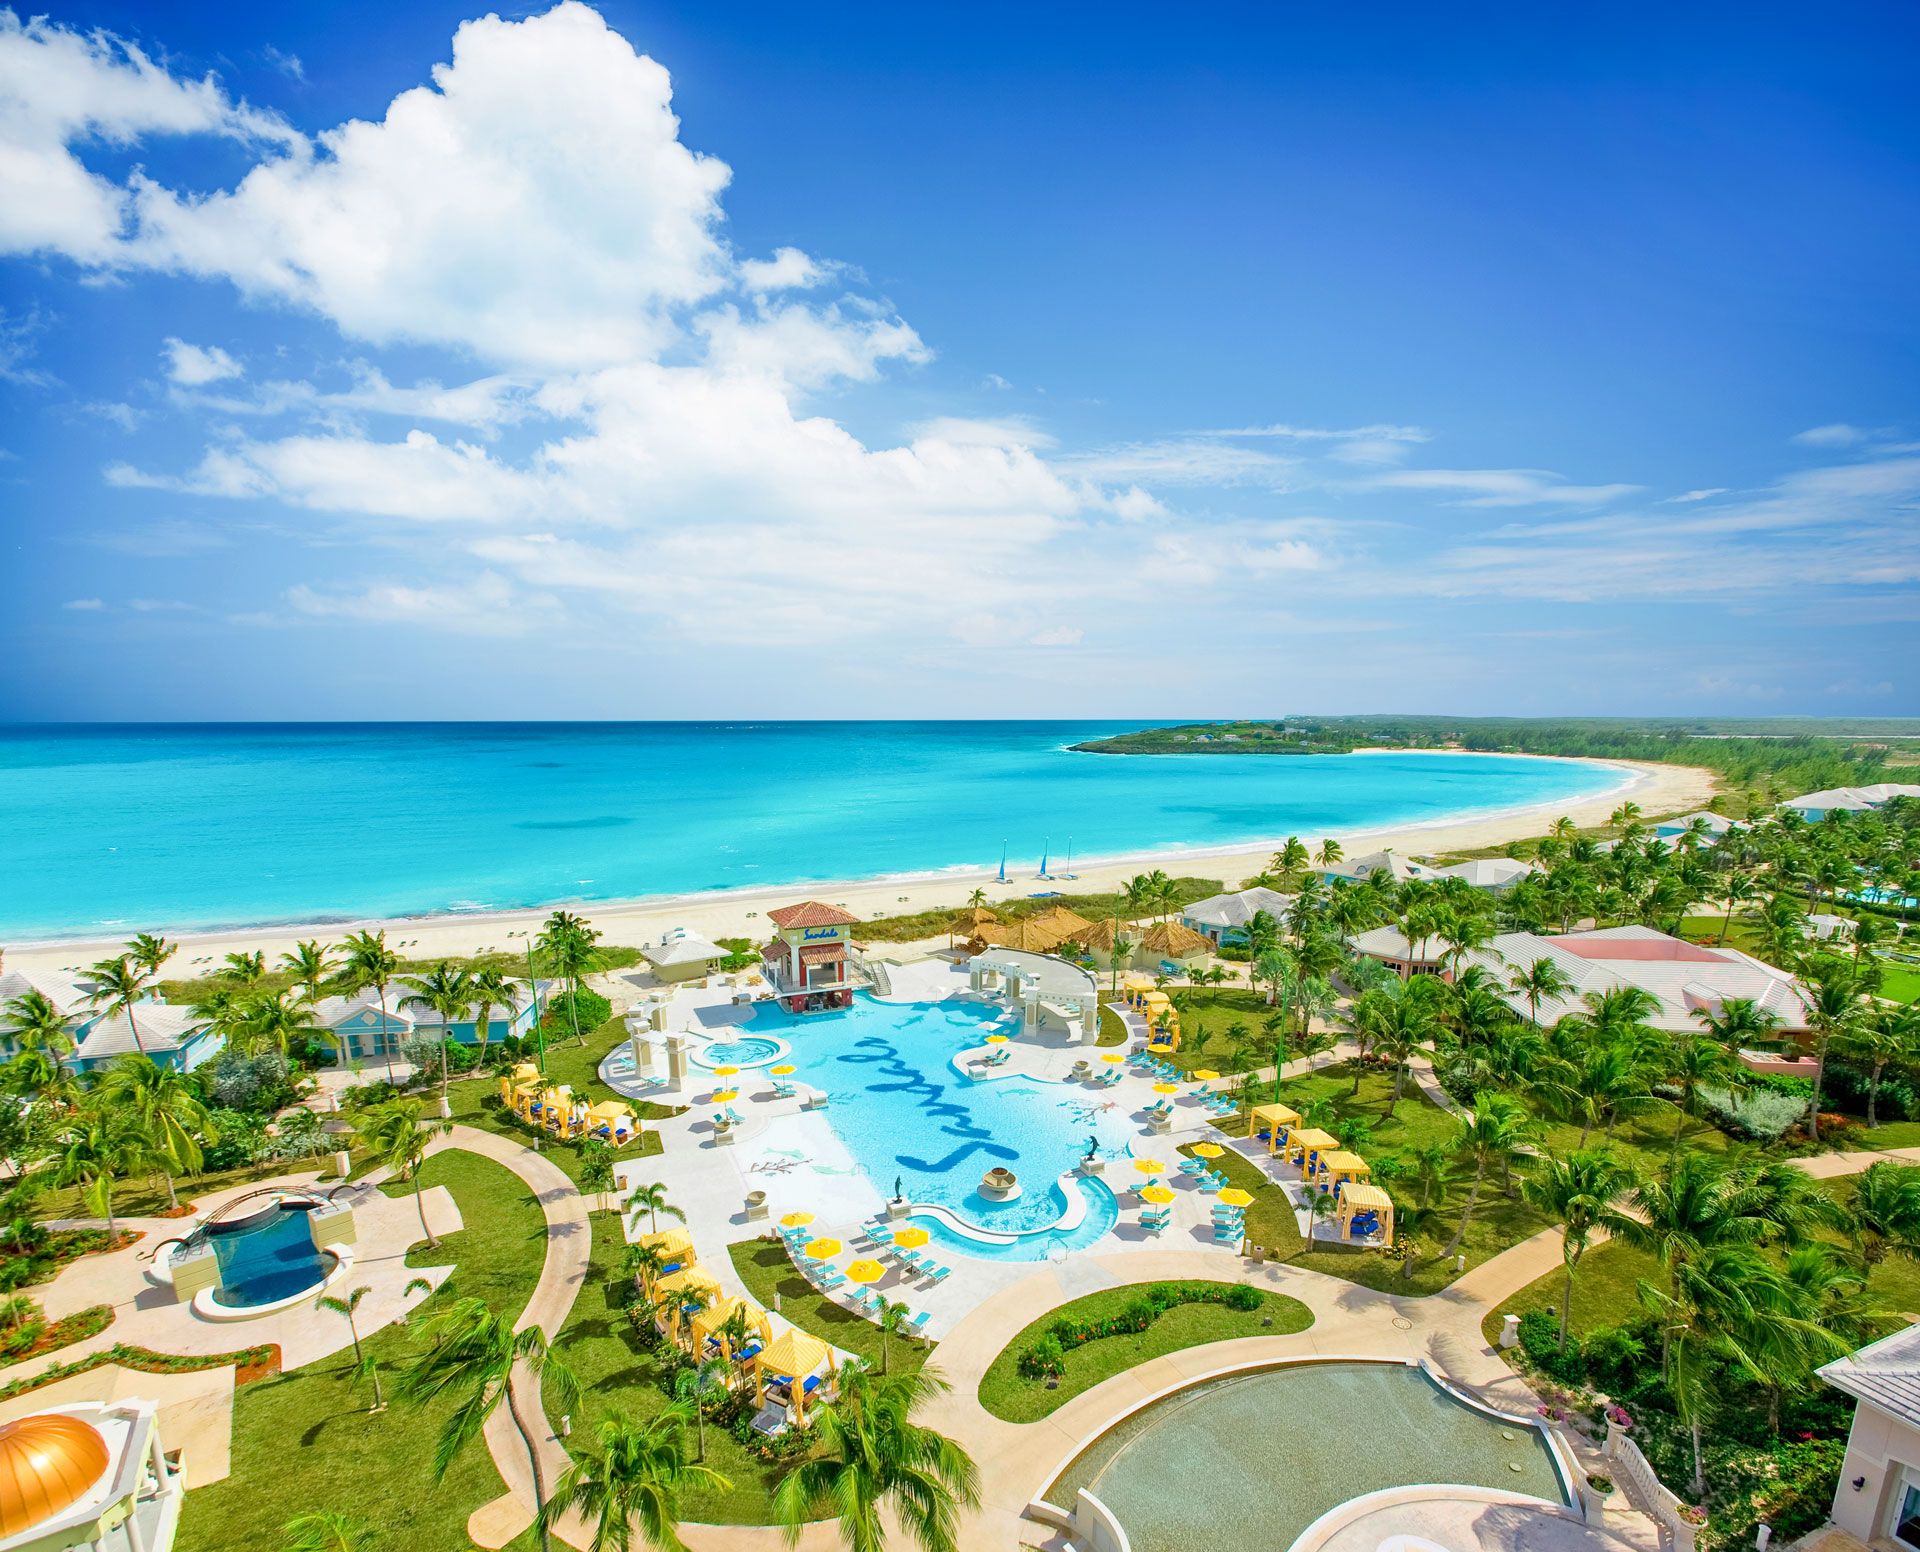 Do You Need A Passport To Travel To The Bahamas? | Sandals